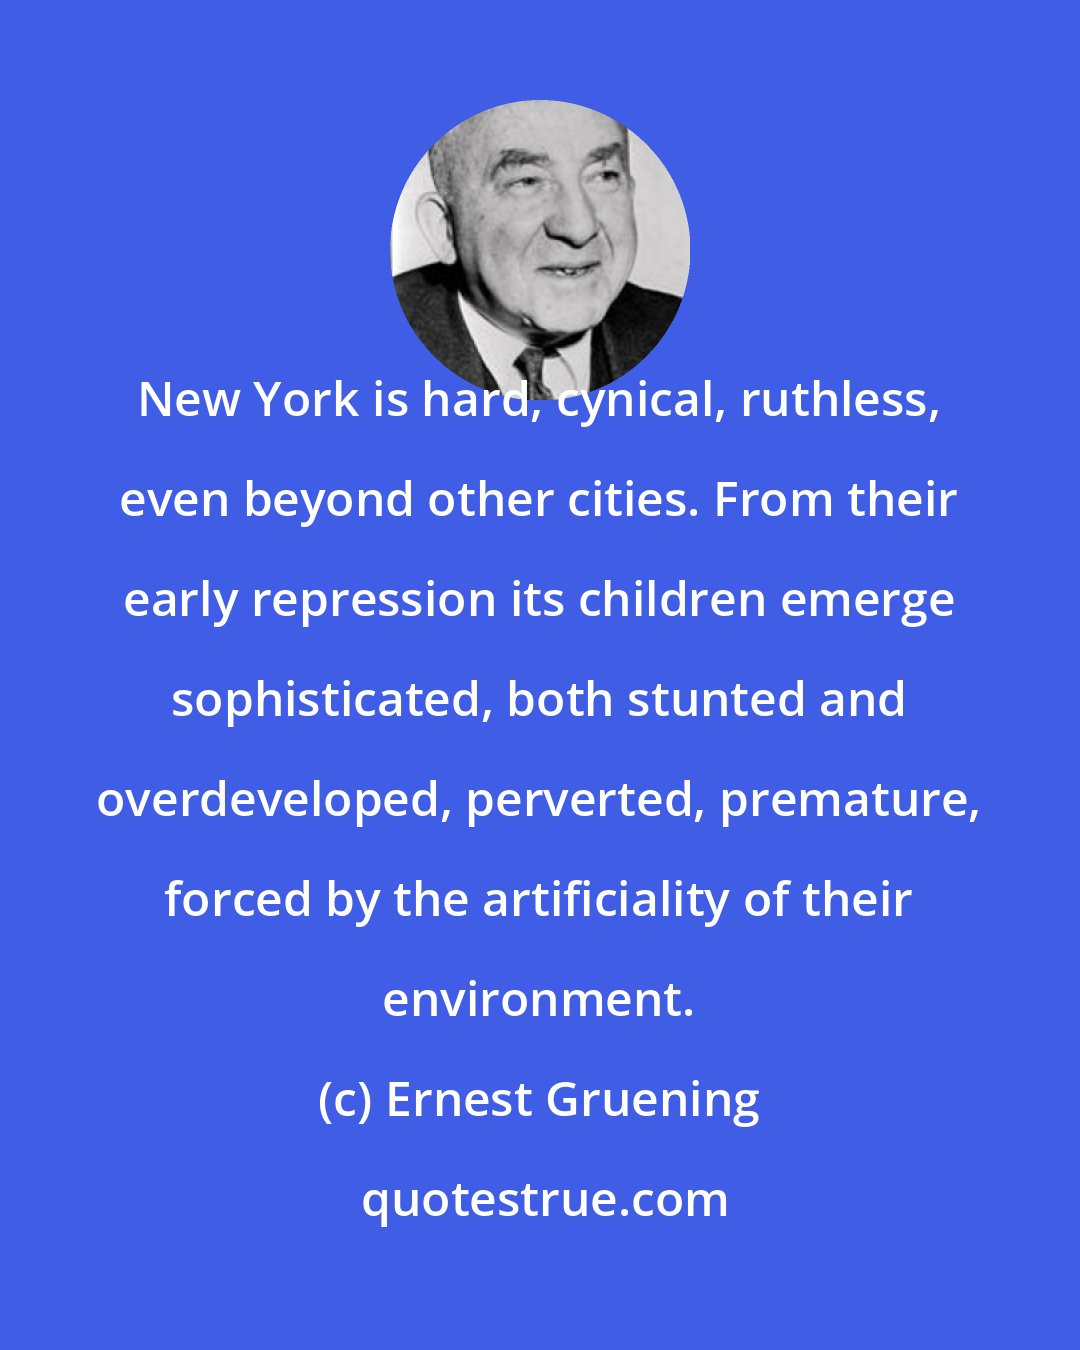 Ernest Gruening: New York is hard, cynical, ruthless, even beyond other cities. From their early repression its children emerge sophisticated, both stunted and overdeveloped, perverted, premature, forced by the artificiality of their environment.